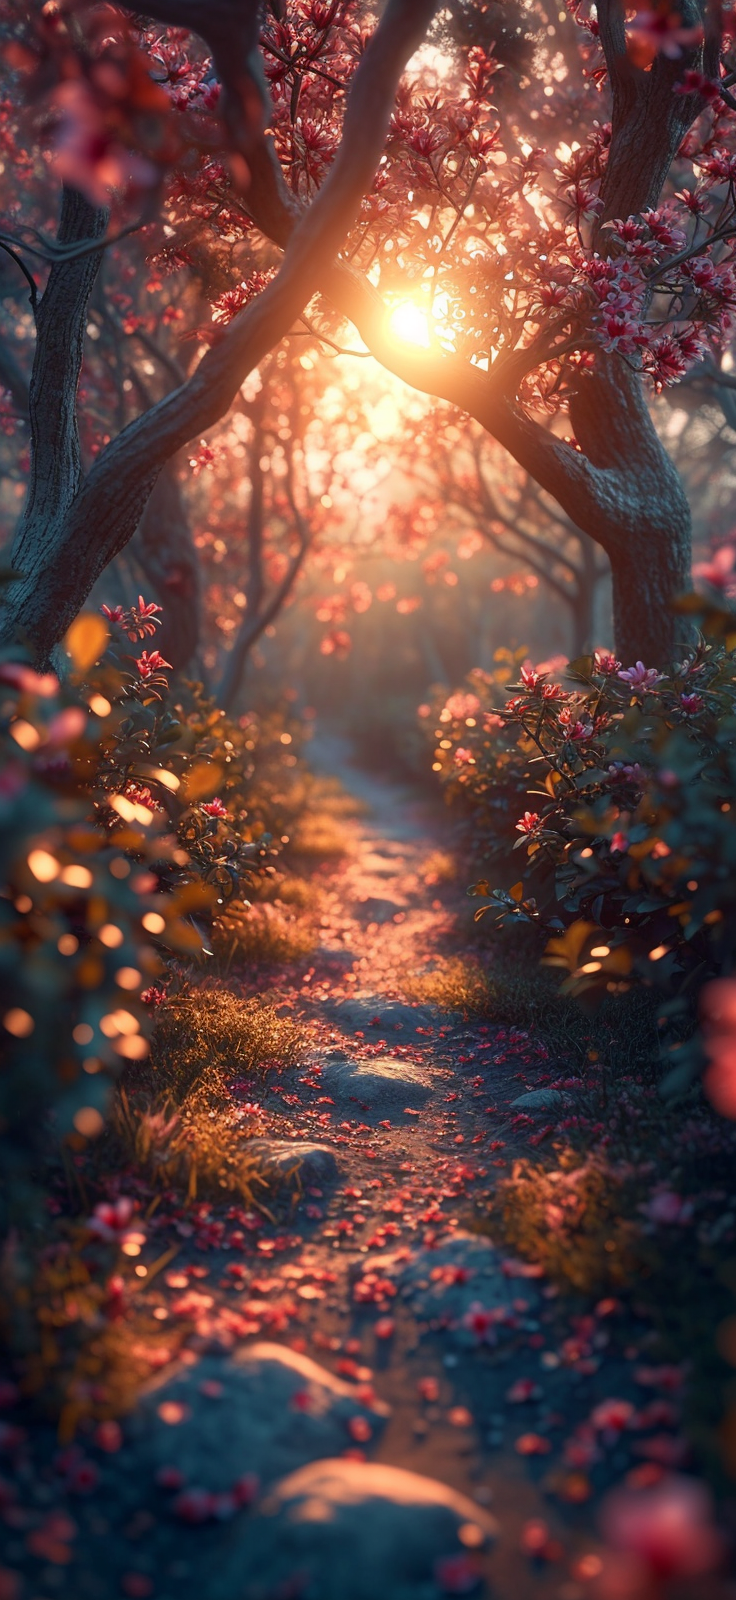 Step into a world of serenity with this stunning HD mobile wallpaper, capturing the magical moment of sunset amidst a blossoming forest.